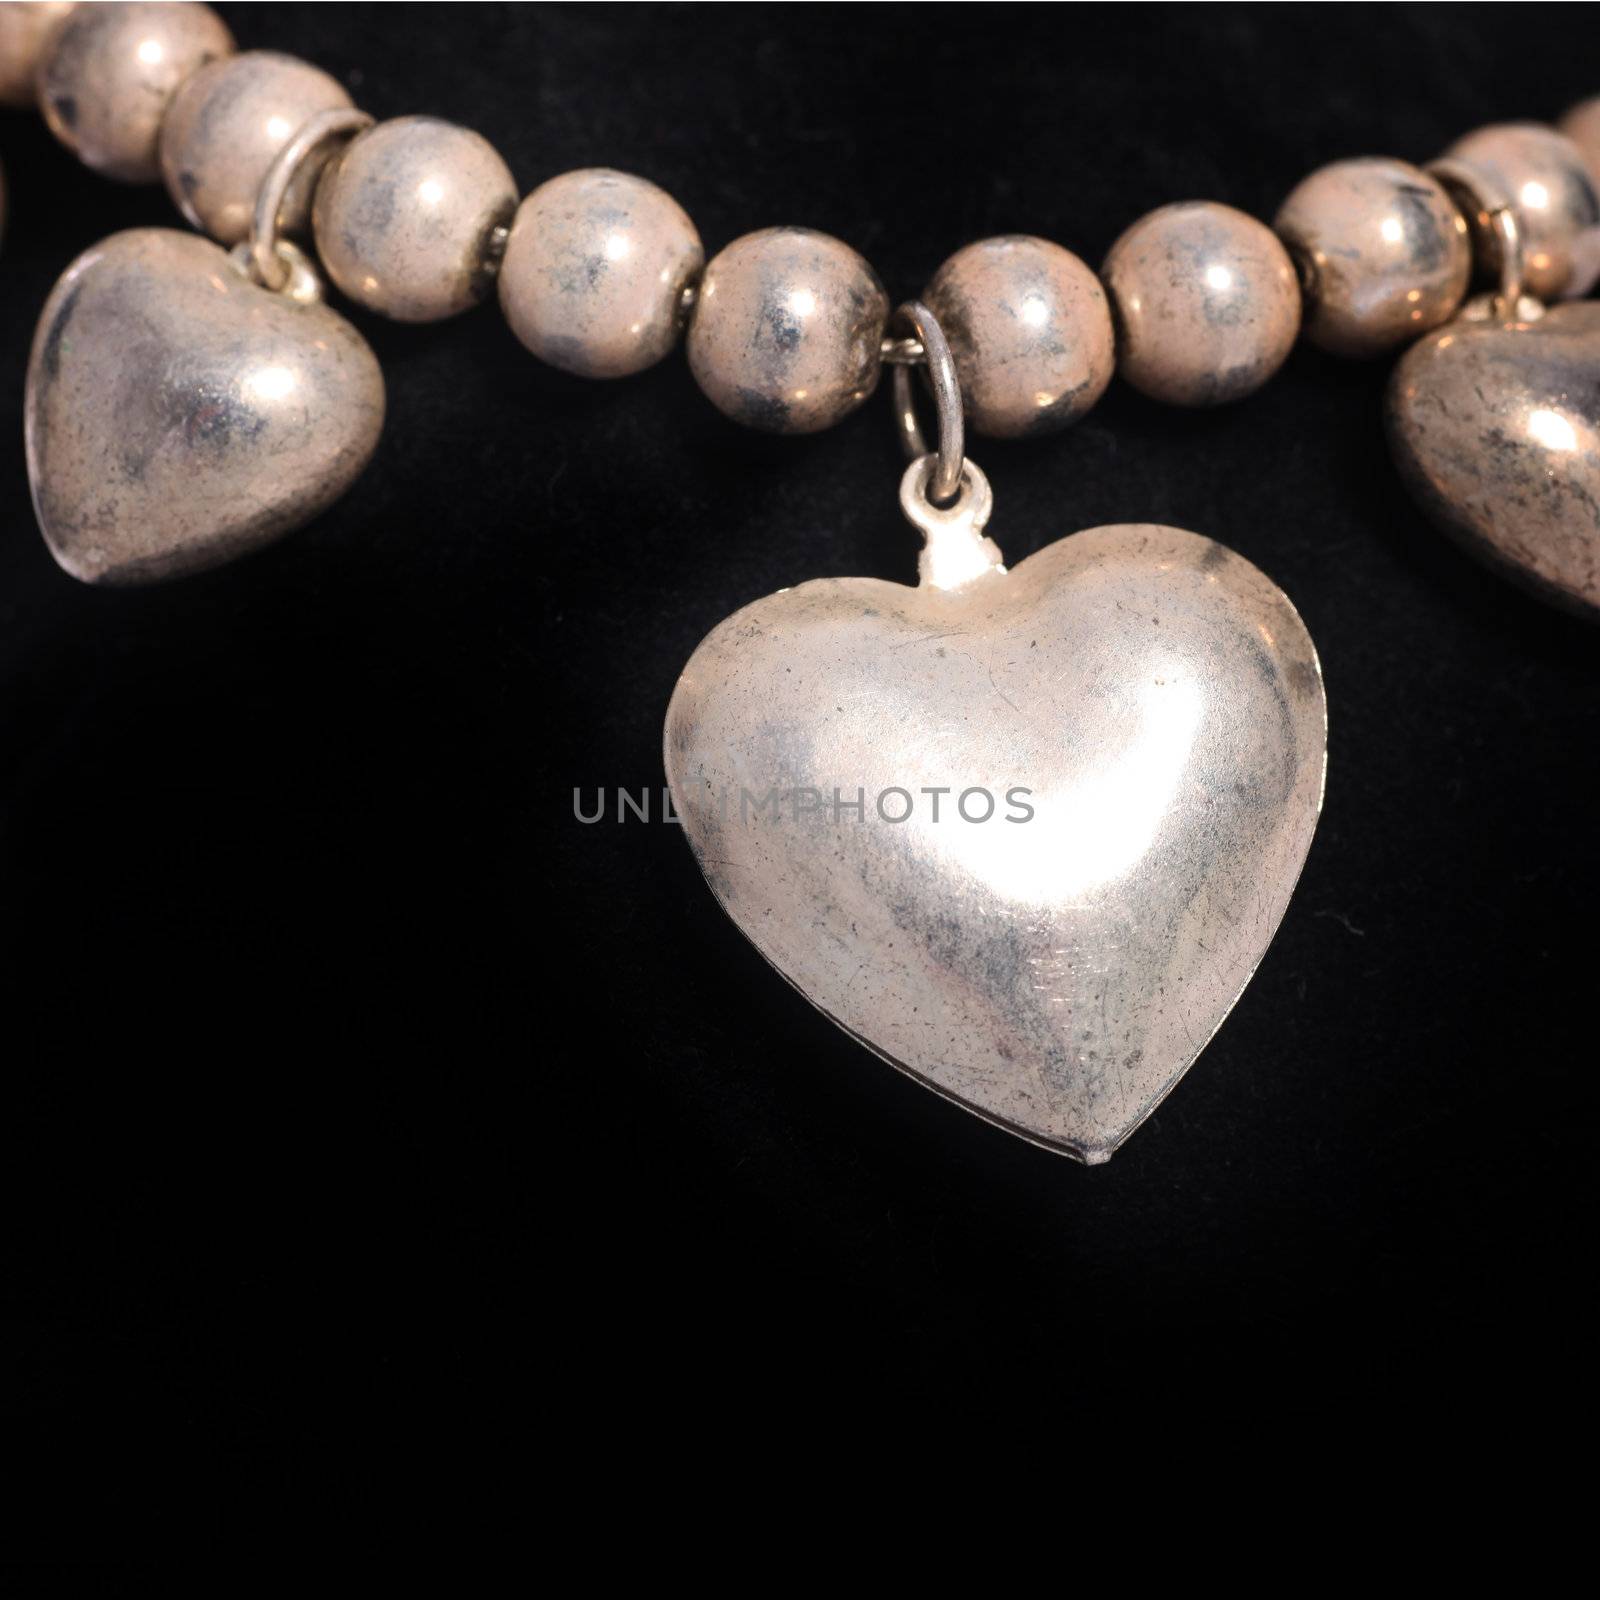 Necklace of round silver beads interspersed with hearts of different sizes isolated on a black studio background